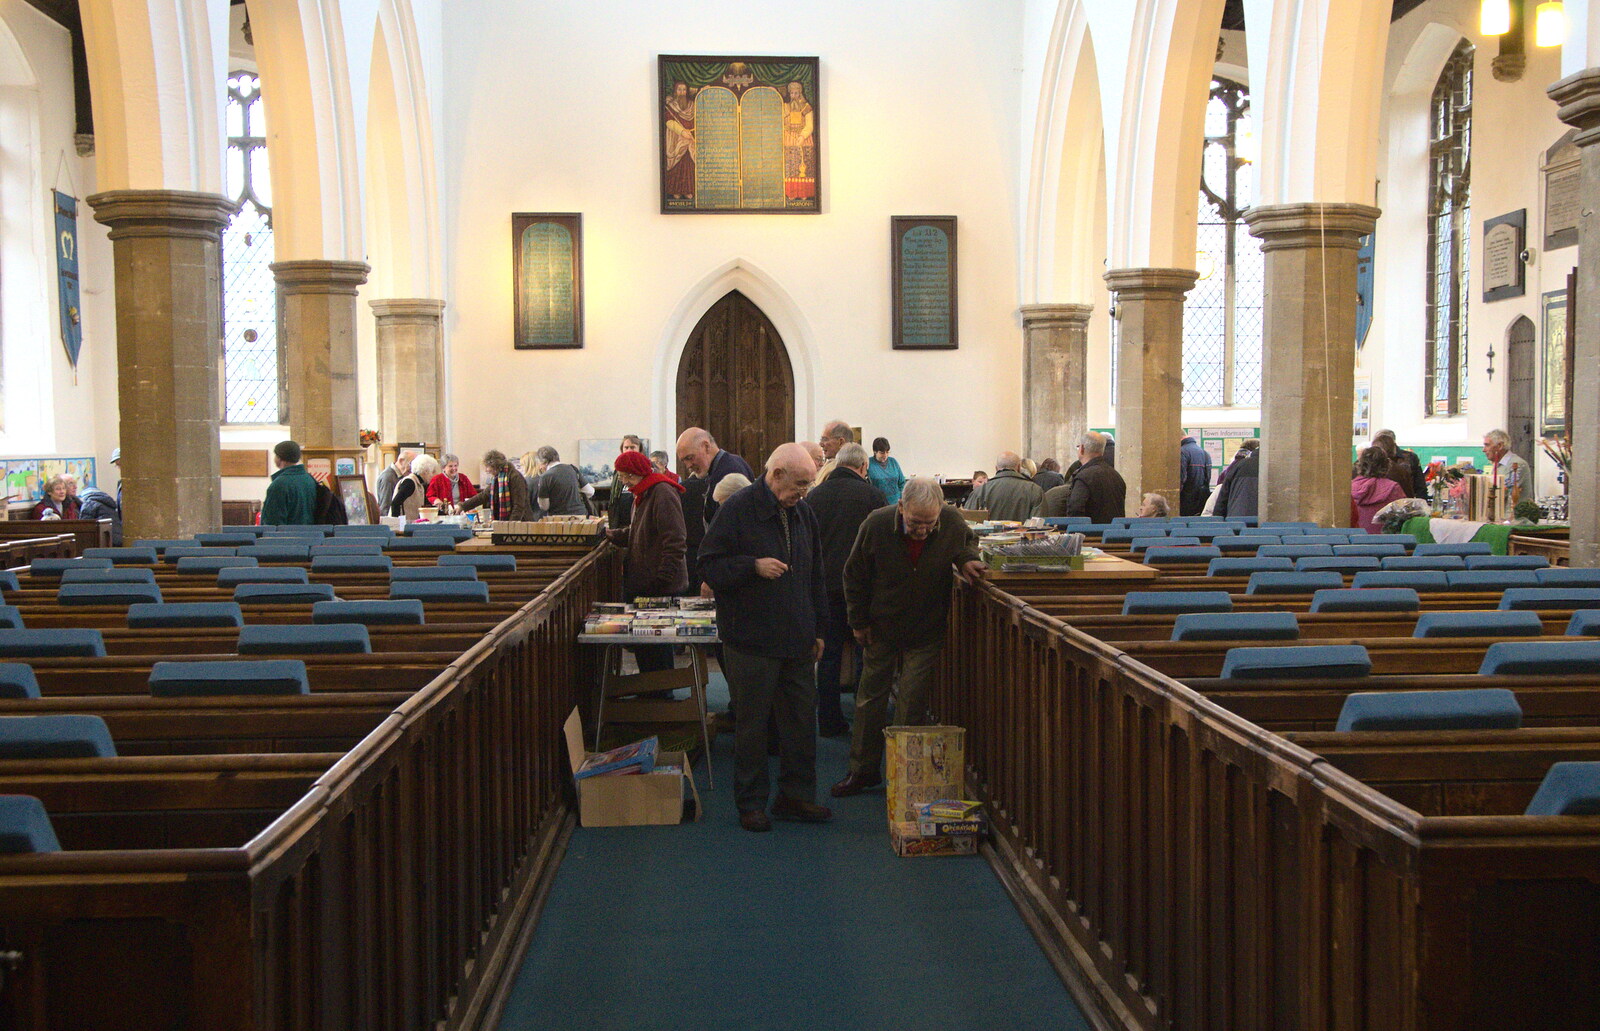 More book-sale action from A Christmas Fair at St. Mary's Church, Diss, Norfolk - 24th November 2012